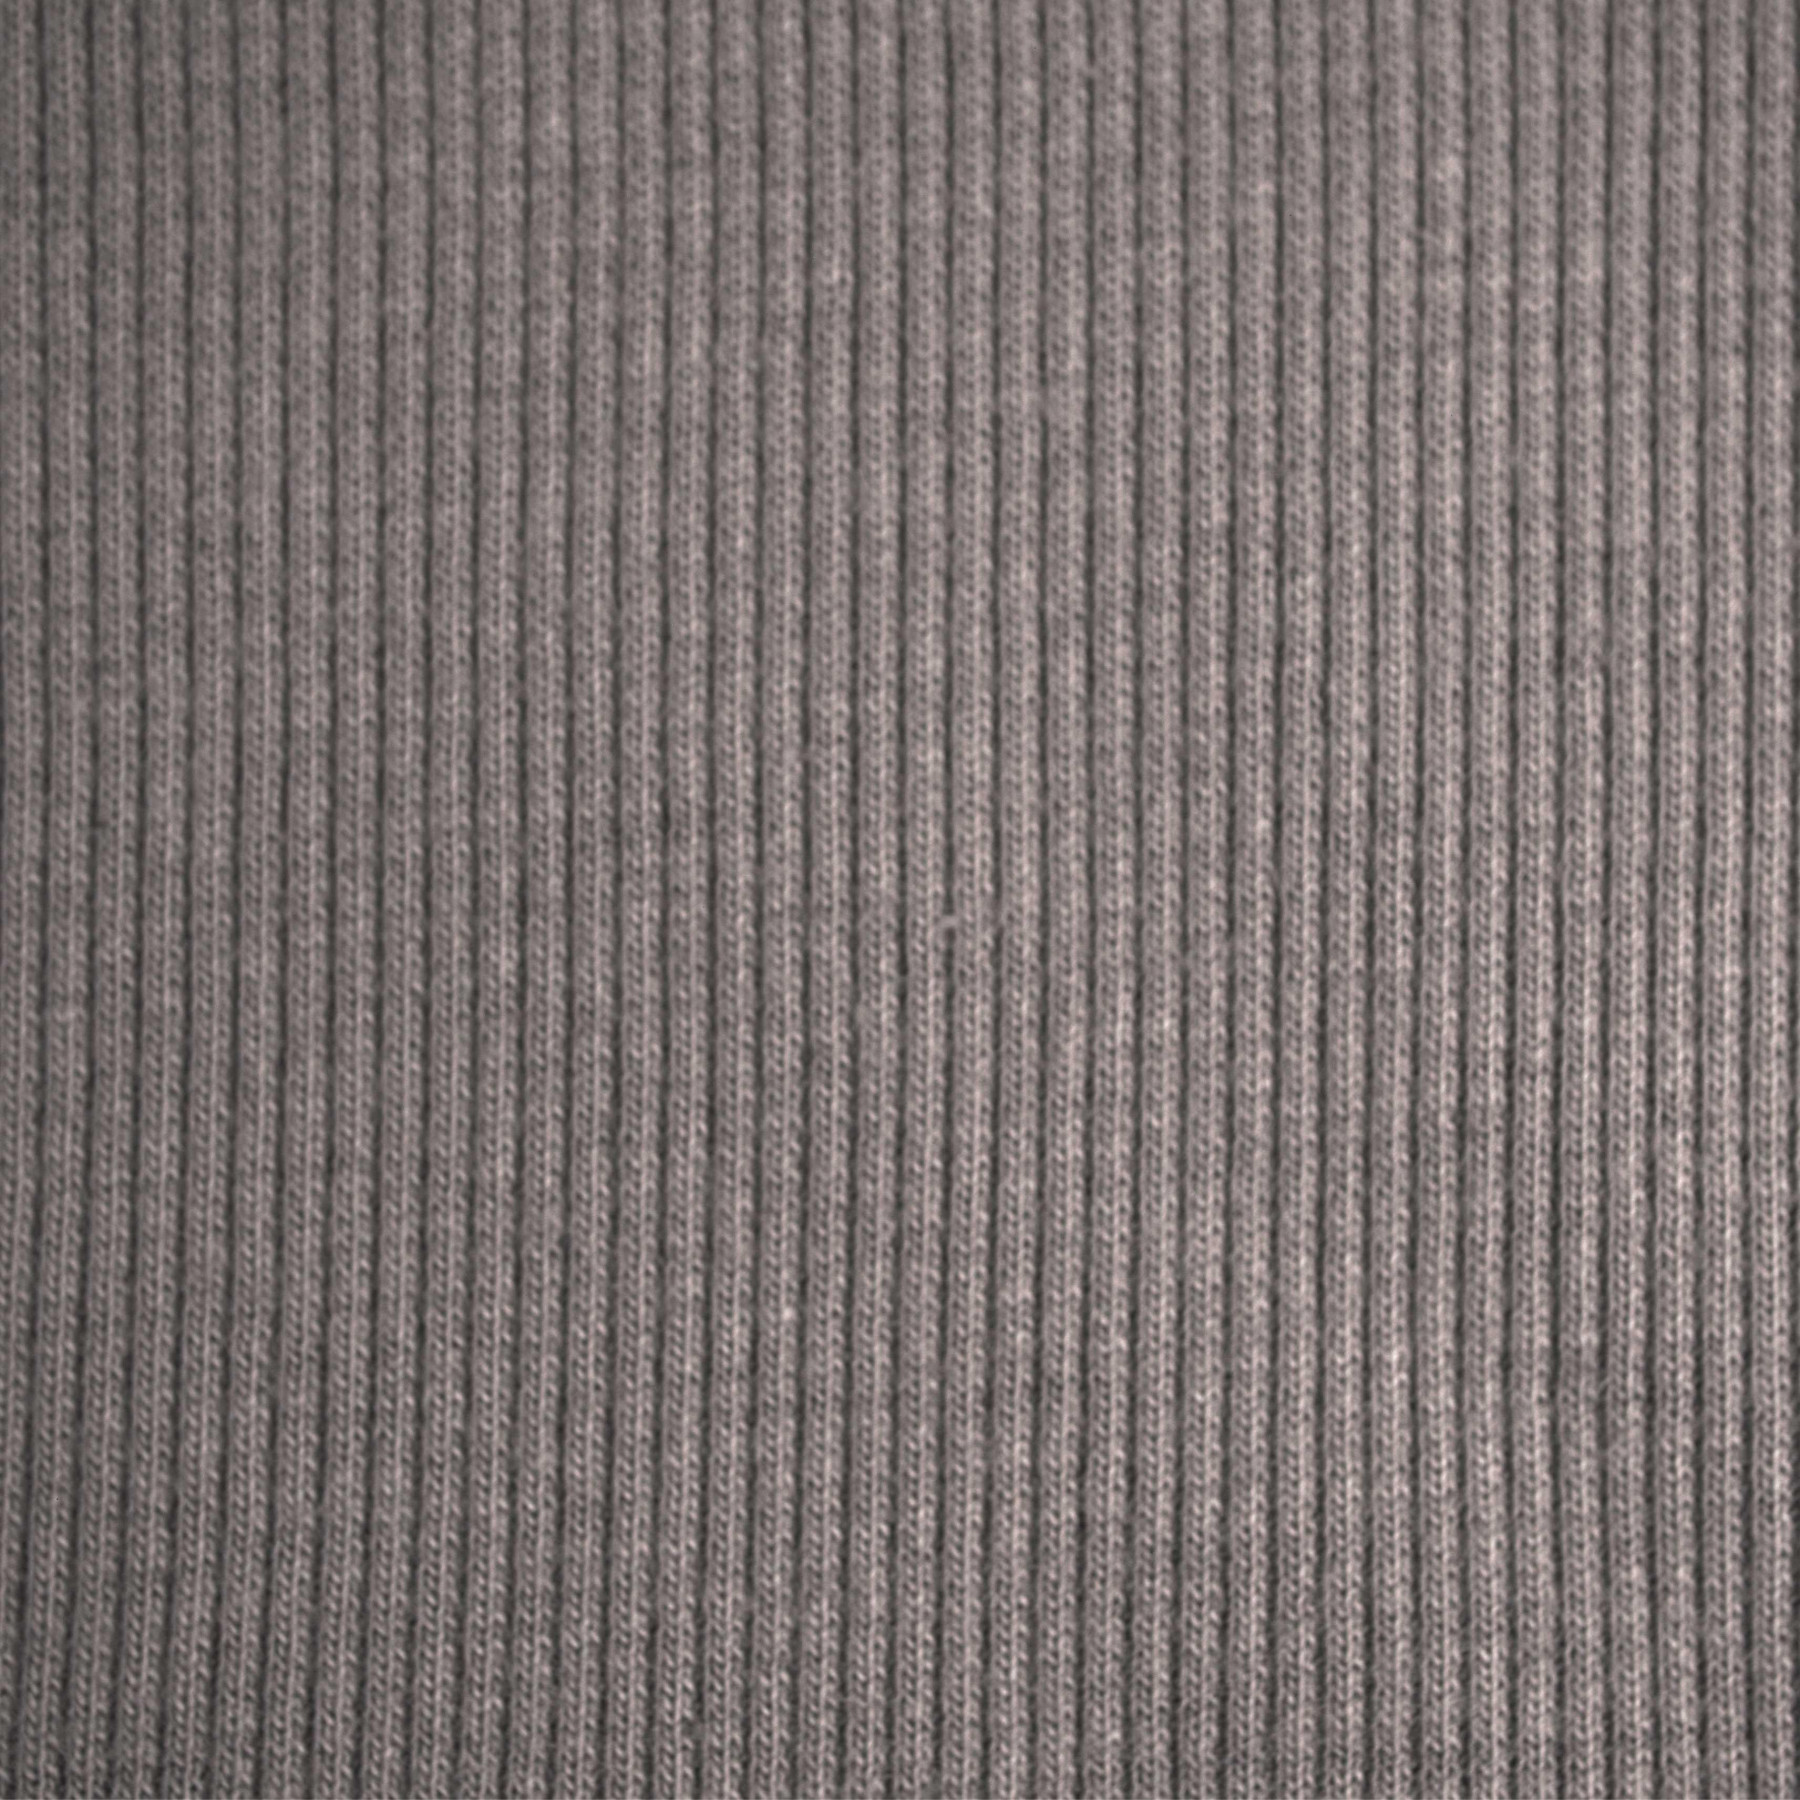 D-44 ROCKY - Ribbed knit fabric